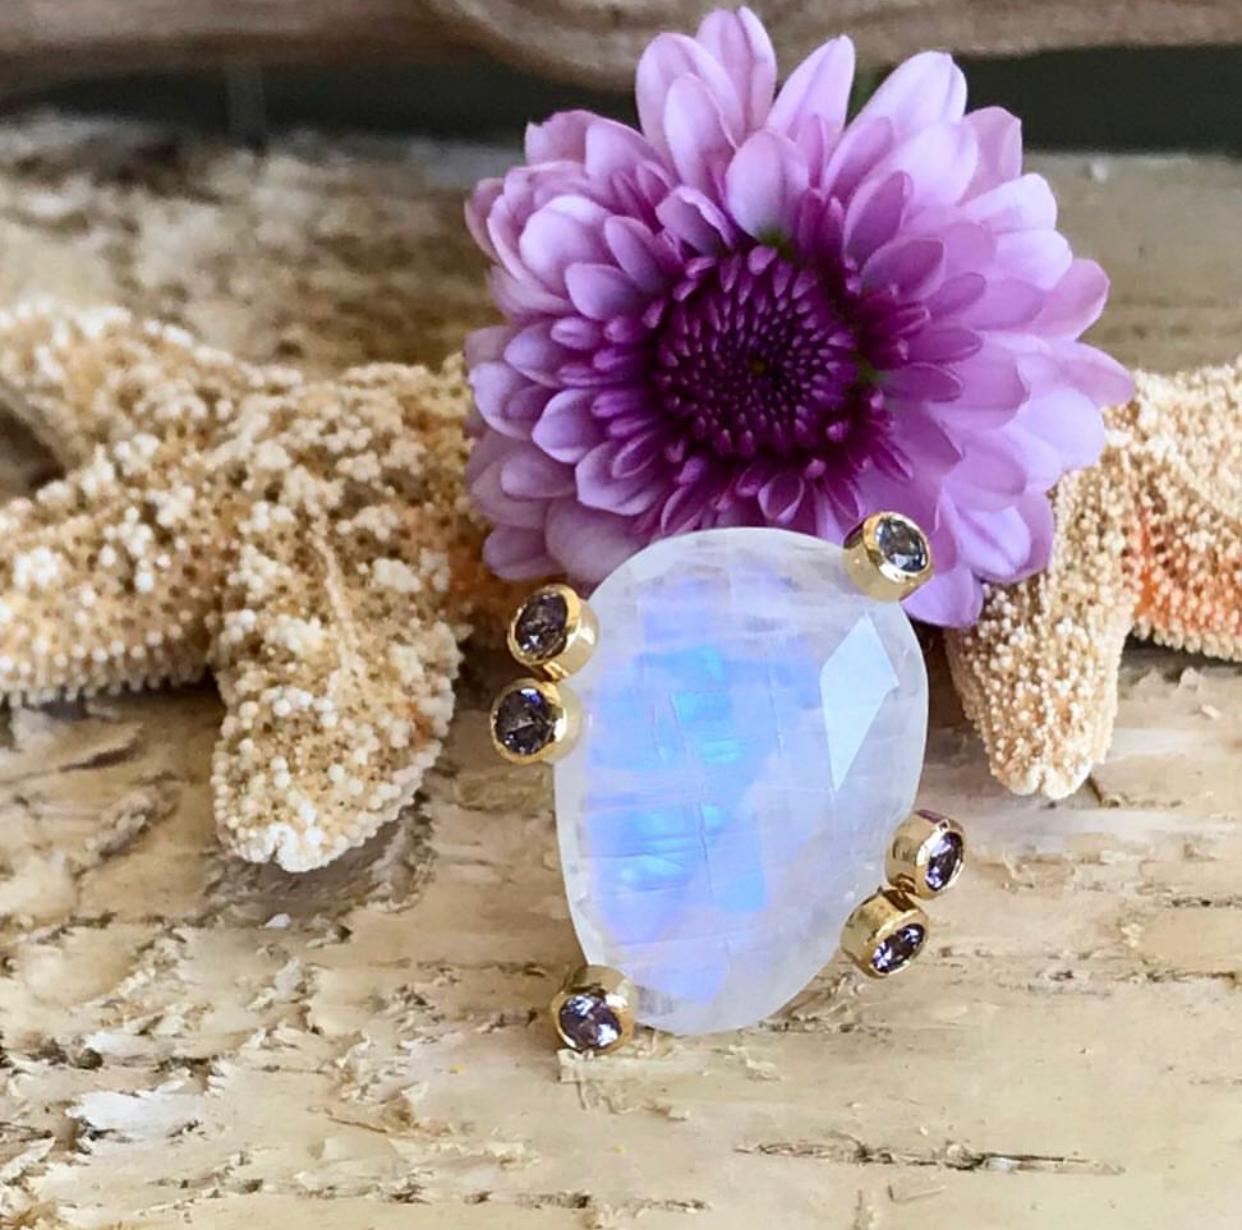 One-of-a-kind fancy shape rainbow moonstone solitaire cocktail ring, accented by sparkling faceted spinels, handcrafted in 18 karat yellow gold.

Perfect for any season, this iridescent rainbow moonstone ring flashes brilliantly with color when it